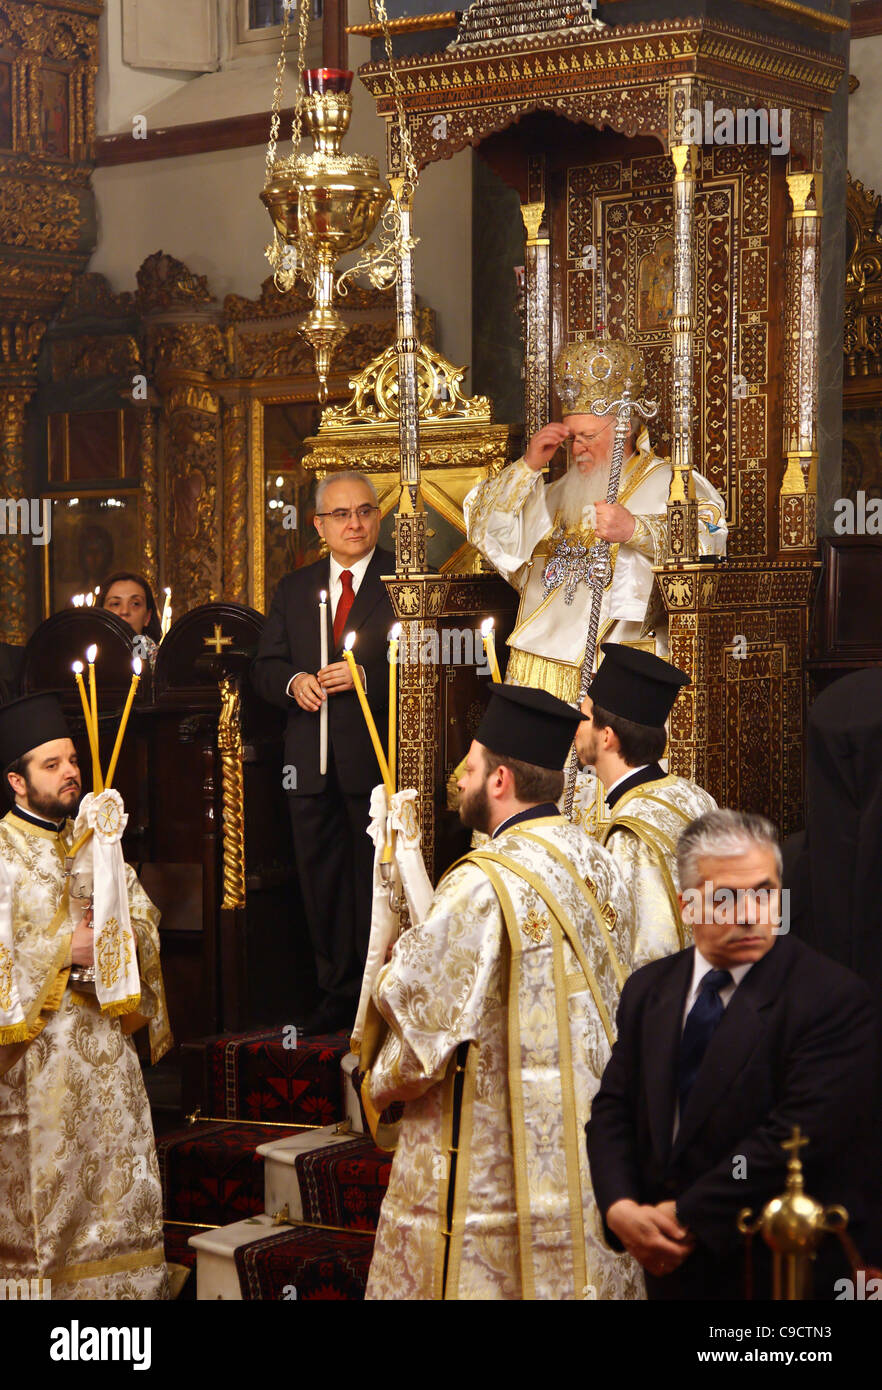 The Greek Orthodox Patriarch, Vartholomaios, on his Episcopal throne at the Patriarchal church of Saint George, Fener, Istanbul. Stock Photo